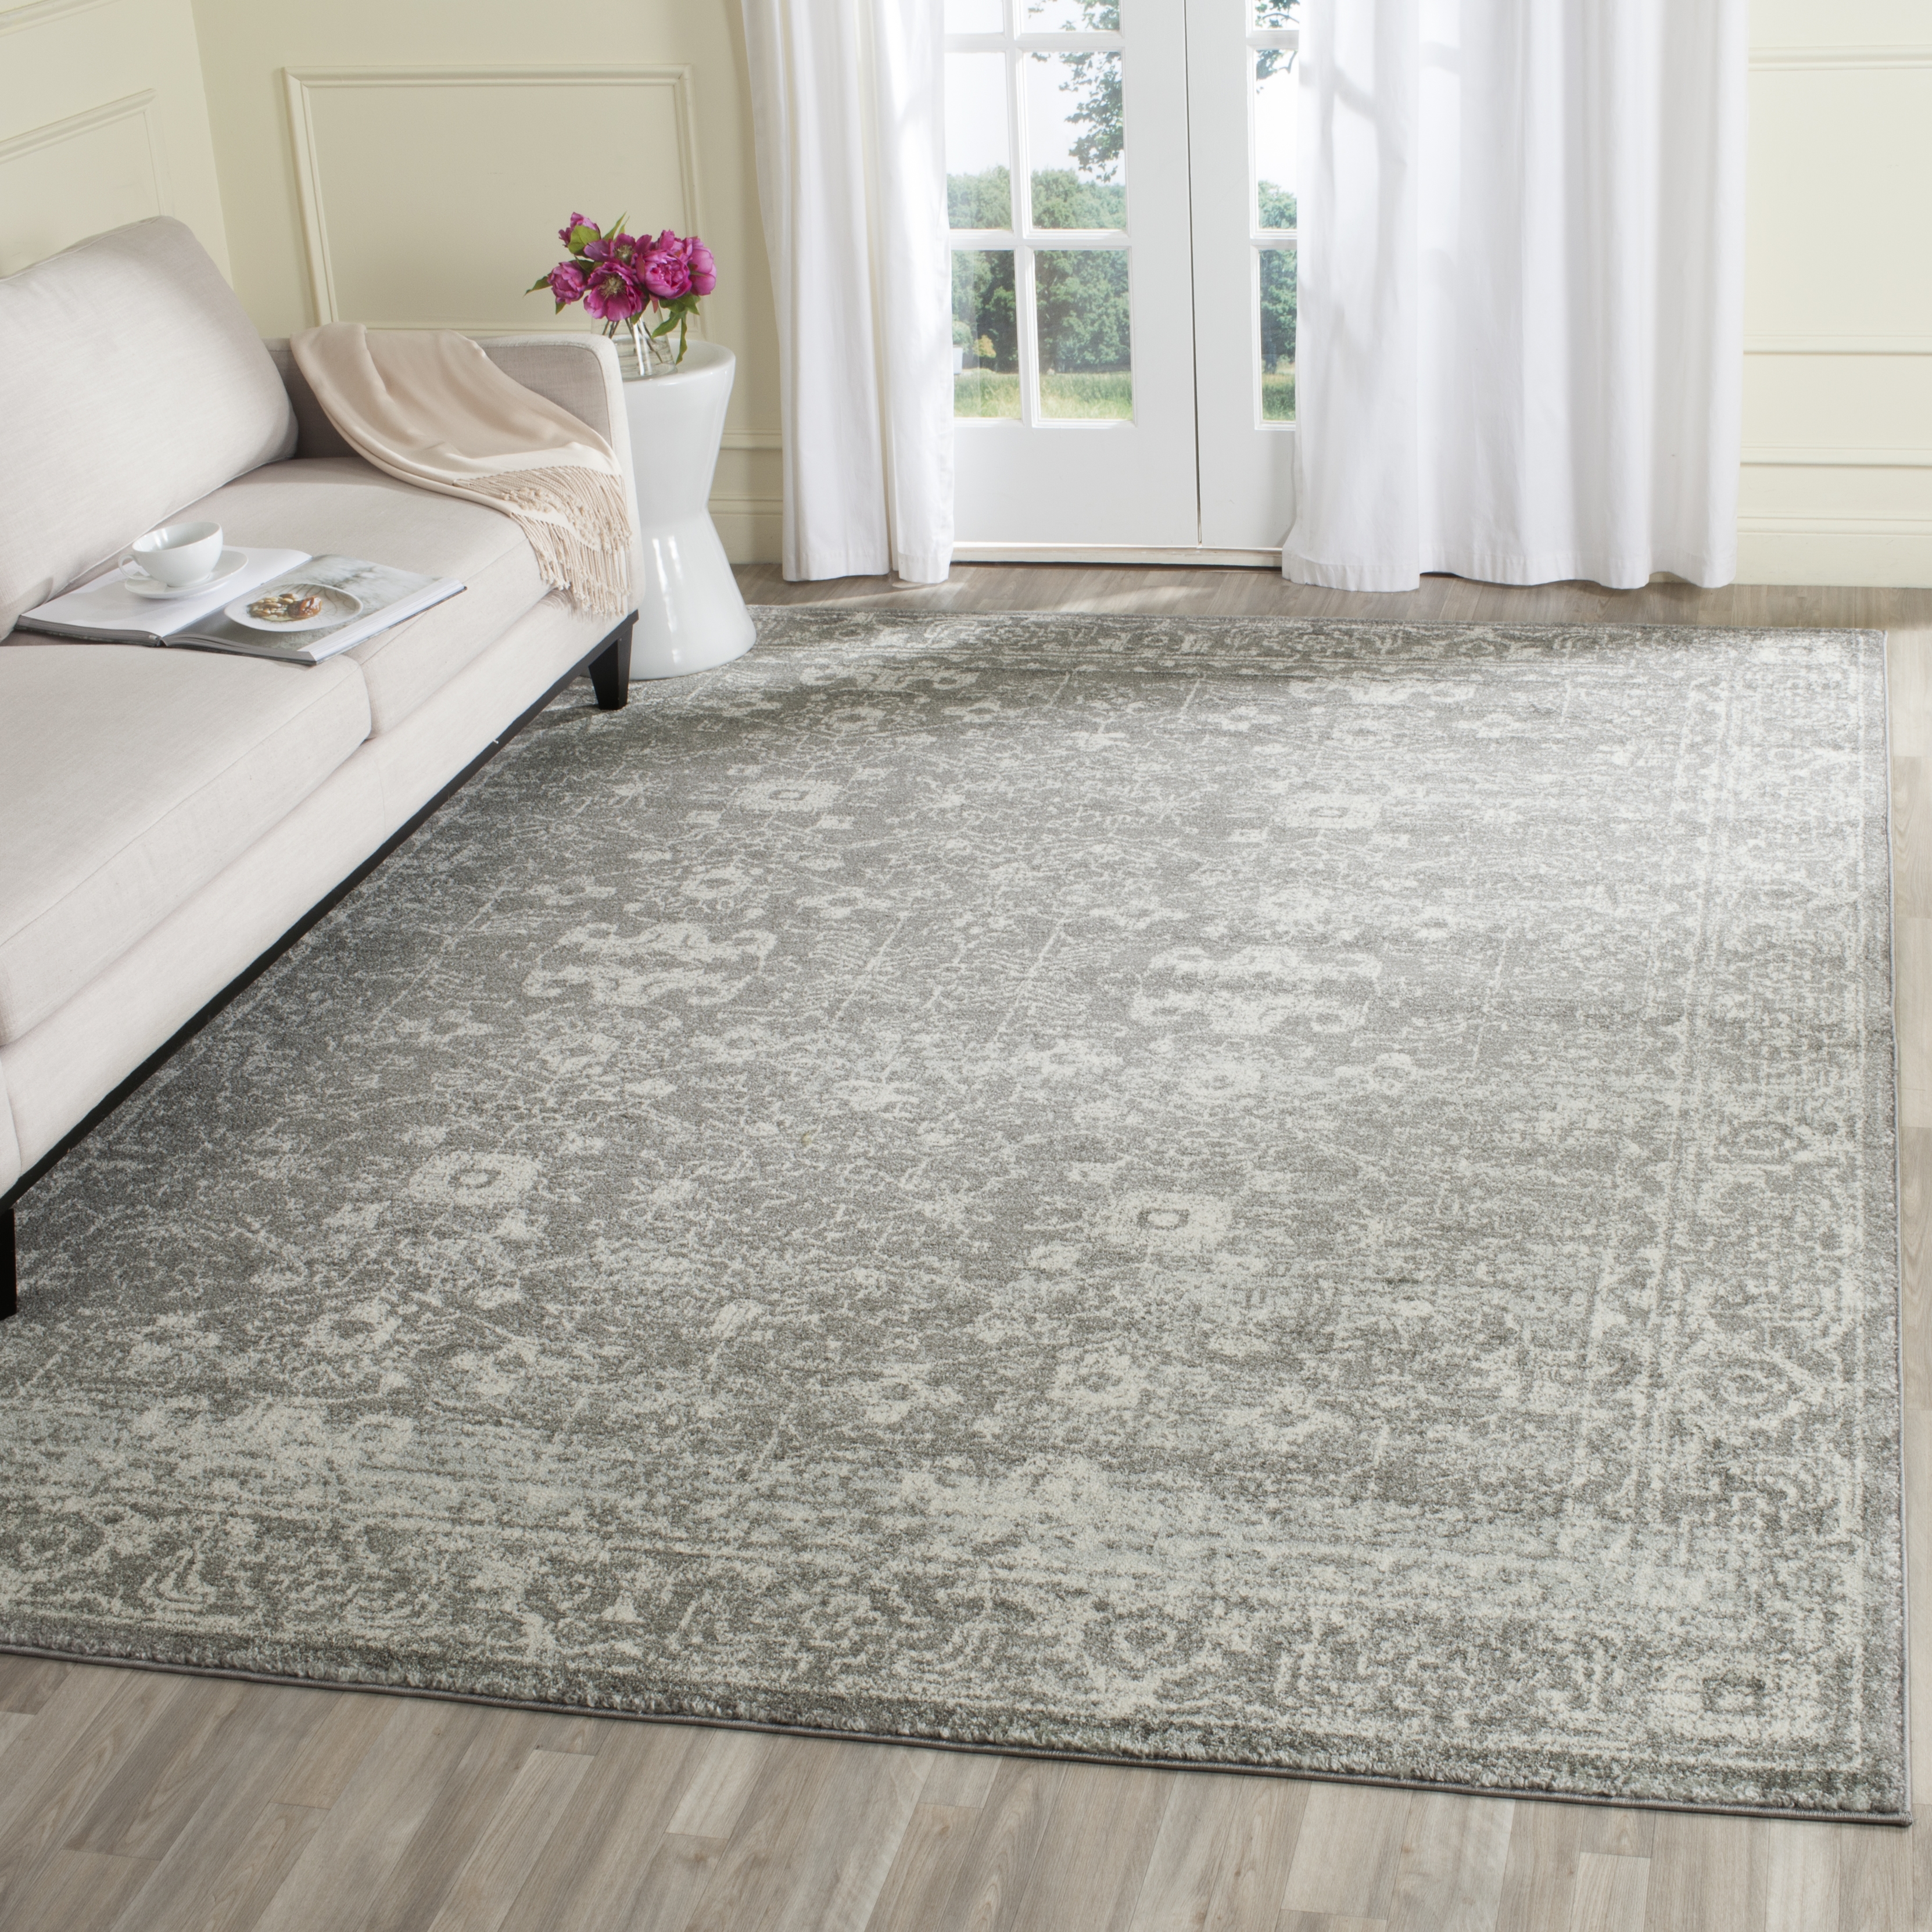 Arlo Home Woven Area Rug, EVK270S, Grey/Ivory,  11' X 15' - Image 1